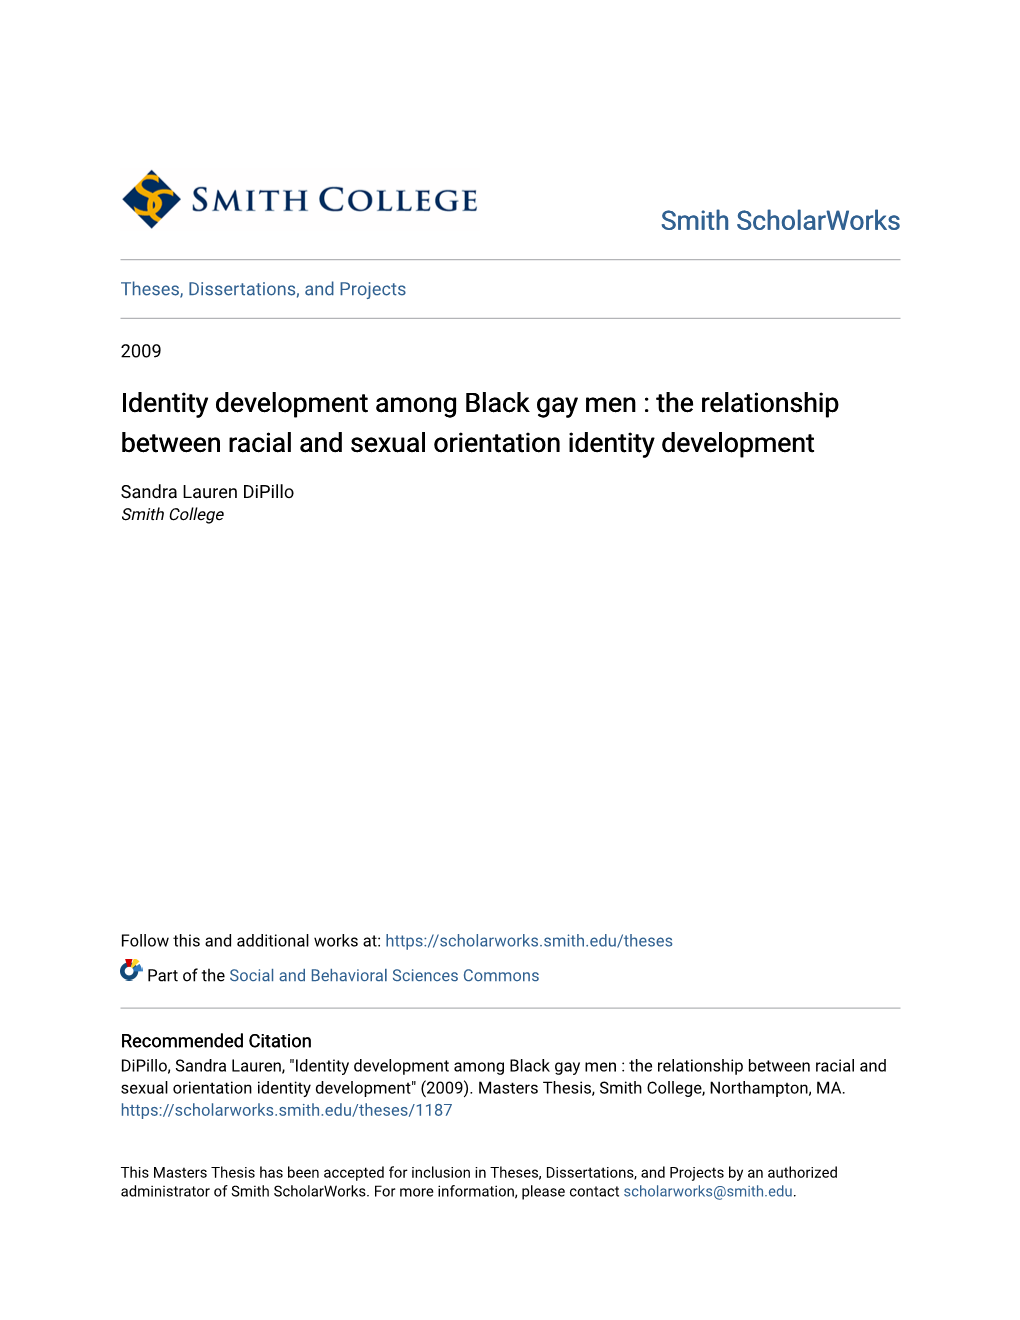 Identity Development Among Black Gay Men : the Relationship Between Racial and Sexual Orientation Identity Development